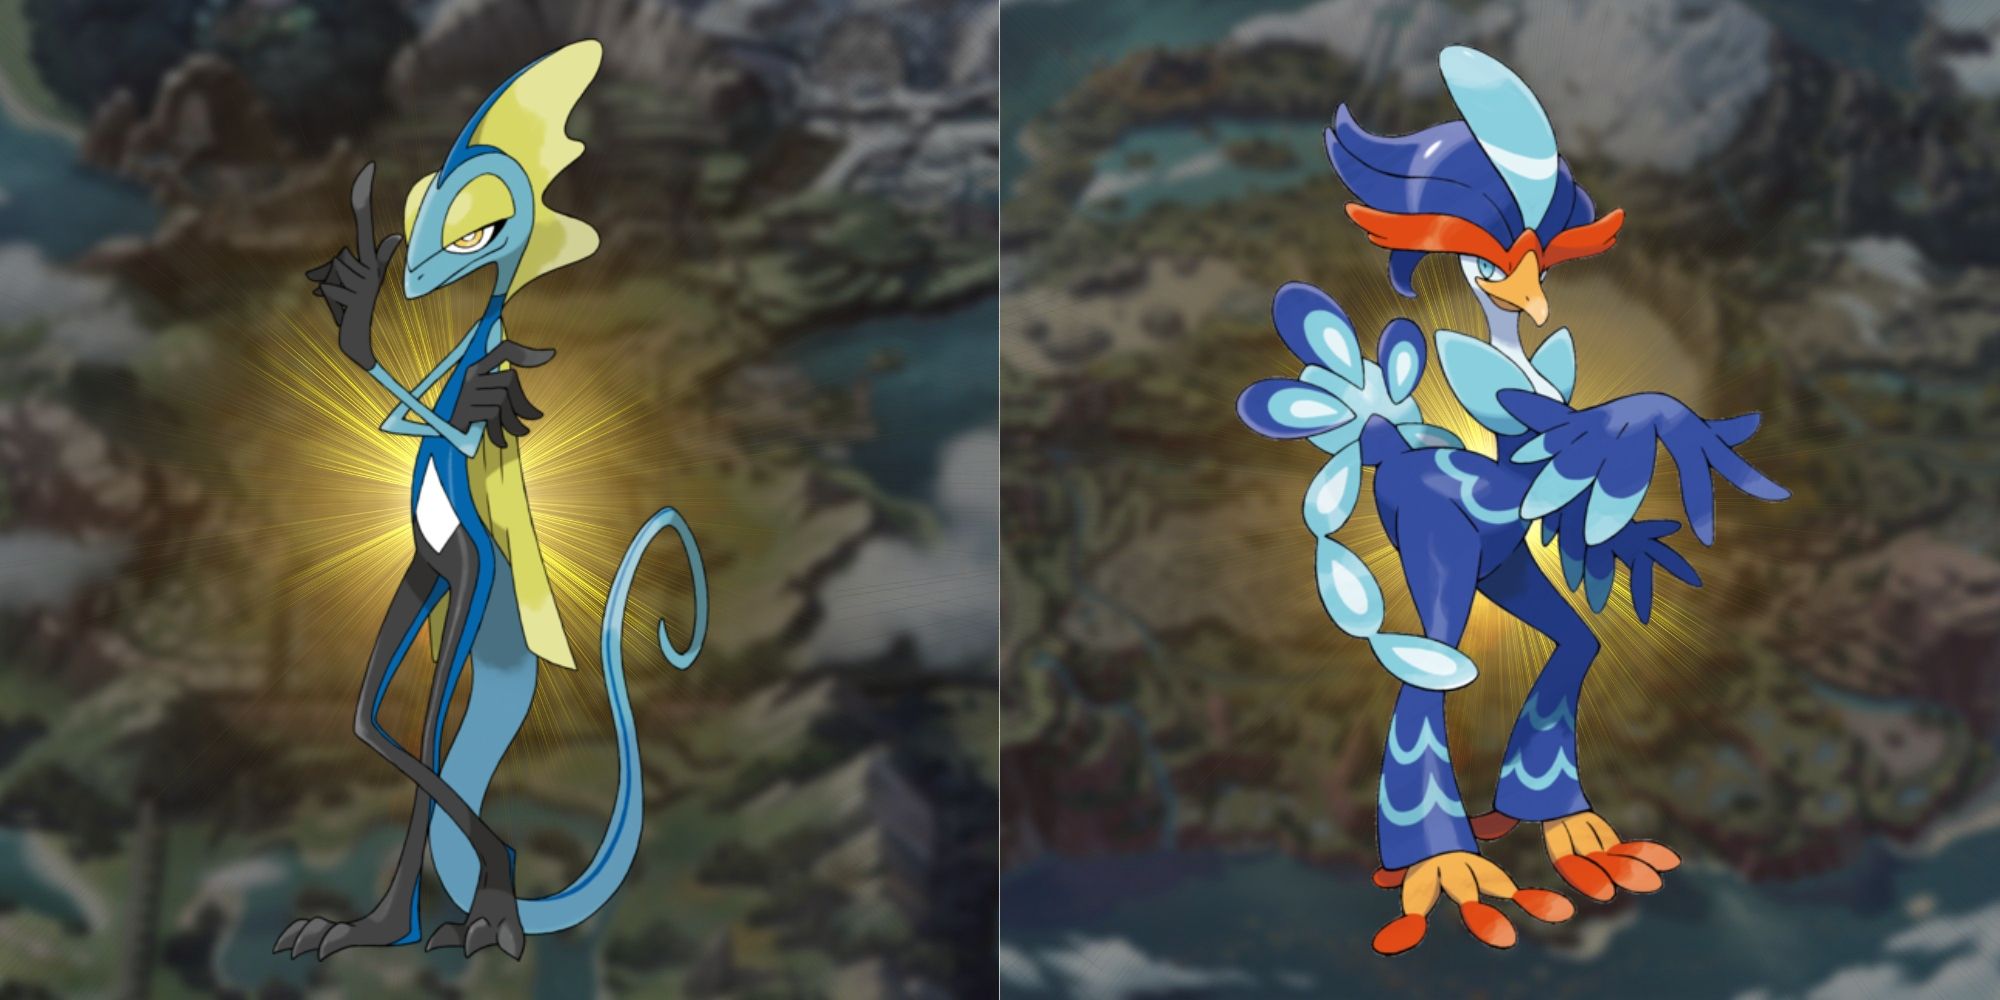 Pokemon's Inteleon to the left and Quaquaval to the right with a yellow backlight behind each of them. In the background there are blurred-out images of the Galar and Paldea maps, respectively.